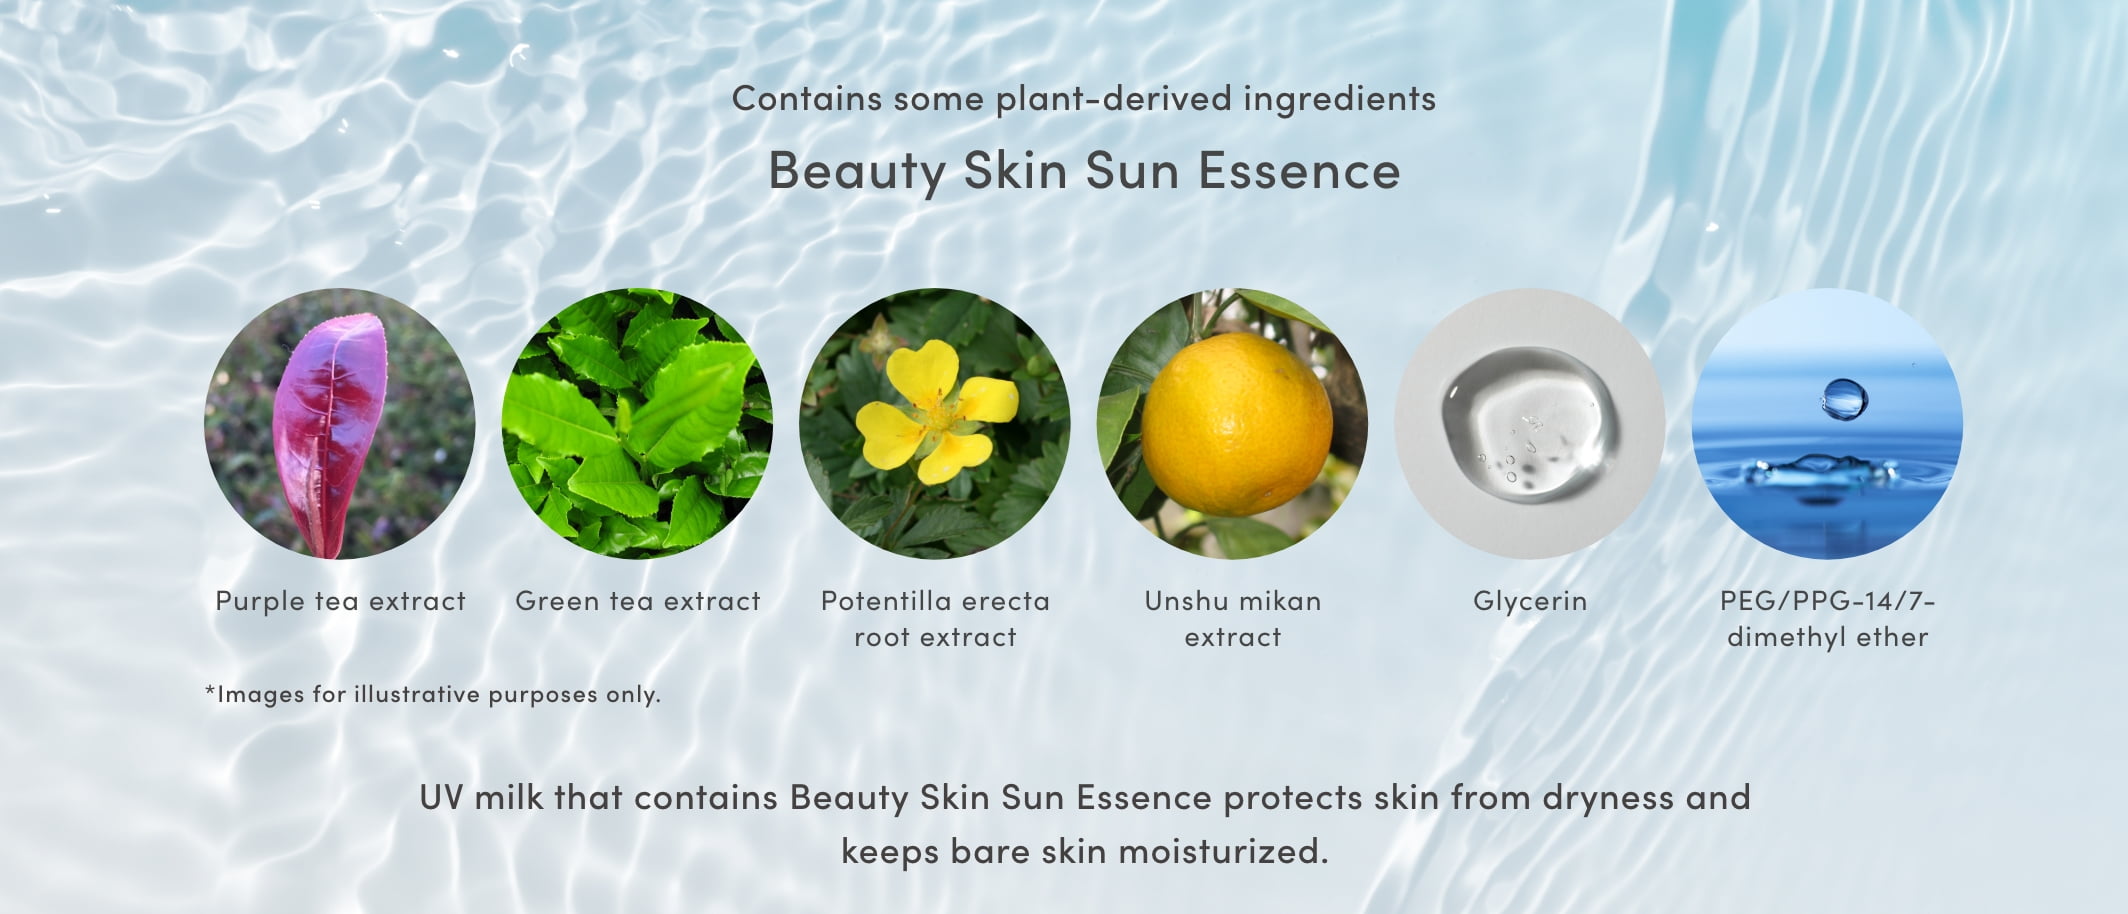 Contains some plant-derived ingredients Beauty Skin Sun Essence (moisturizing)